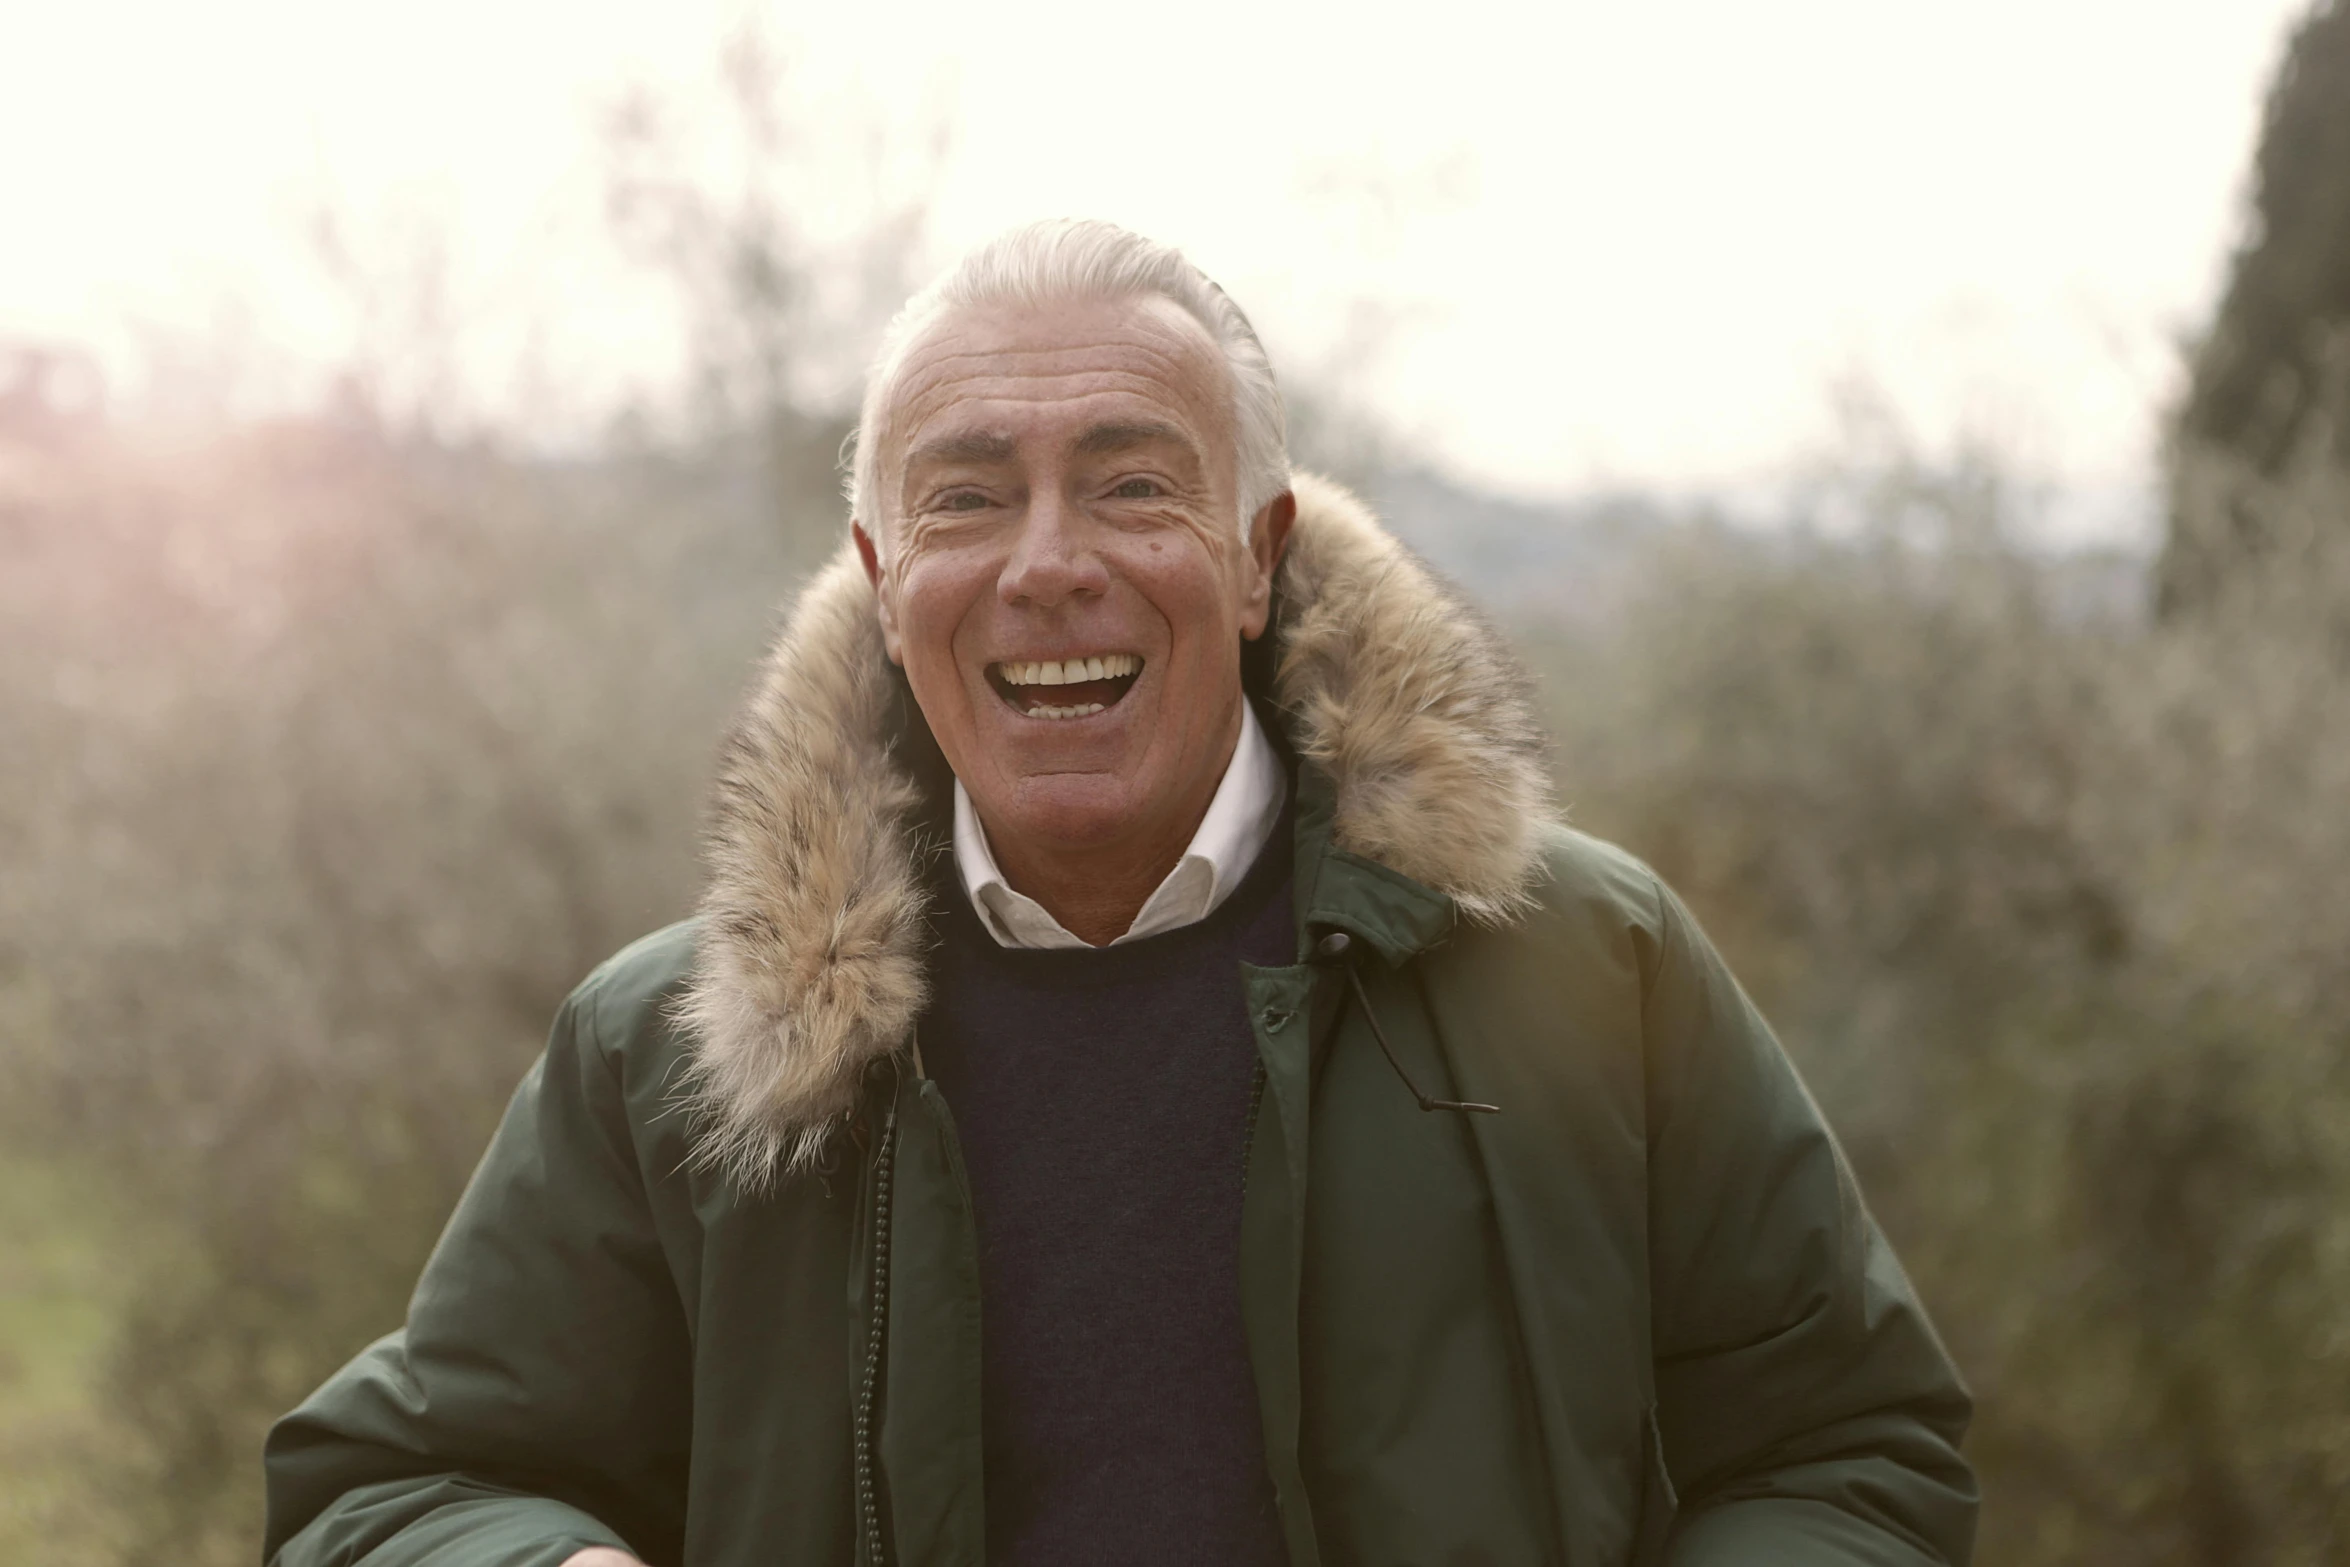 a man in a parka smiles and looks off to the side